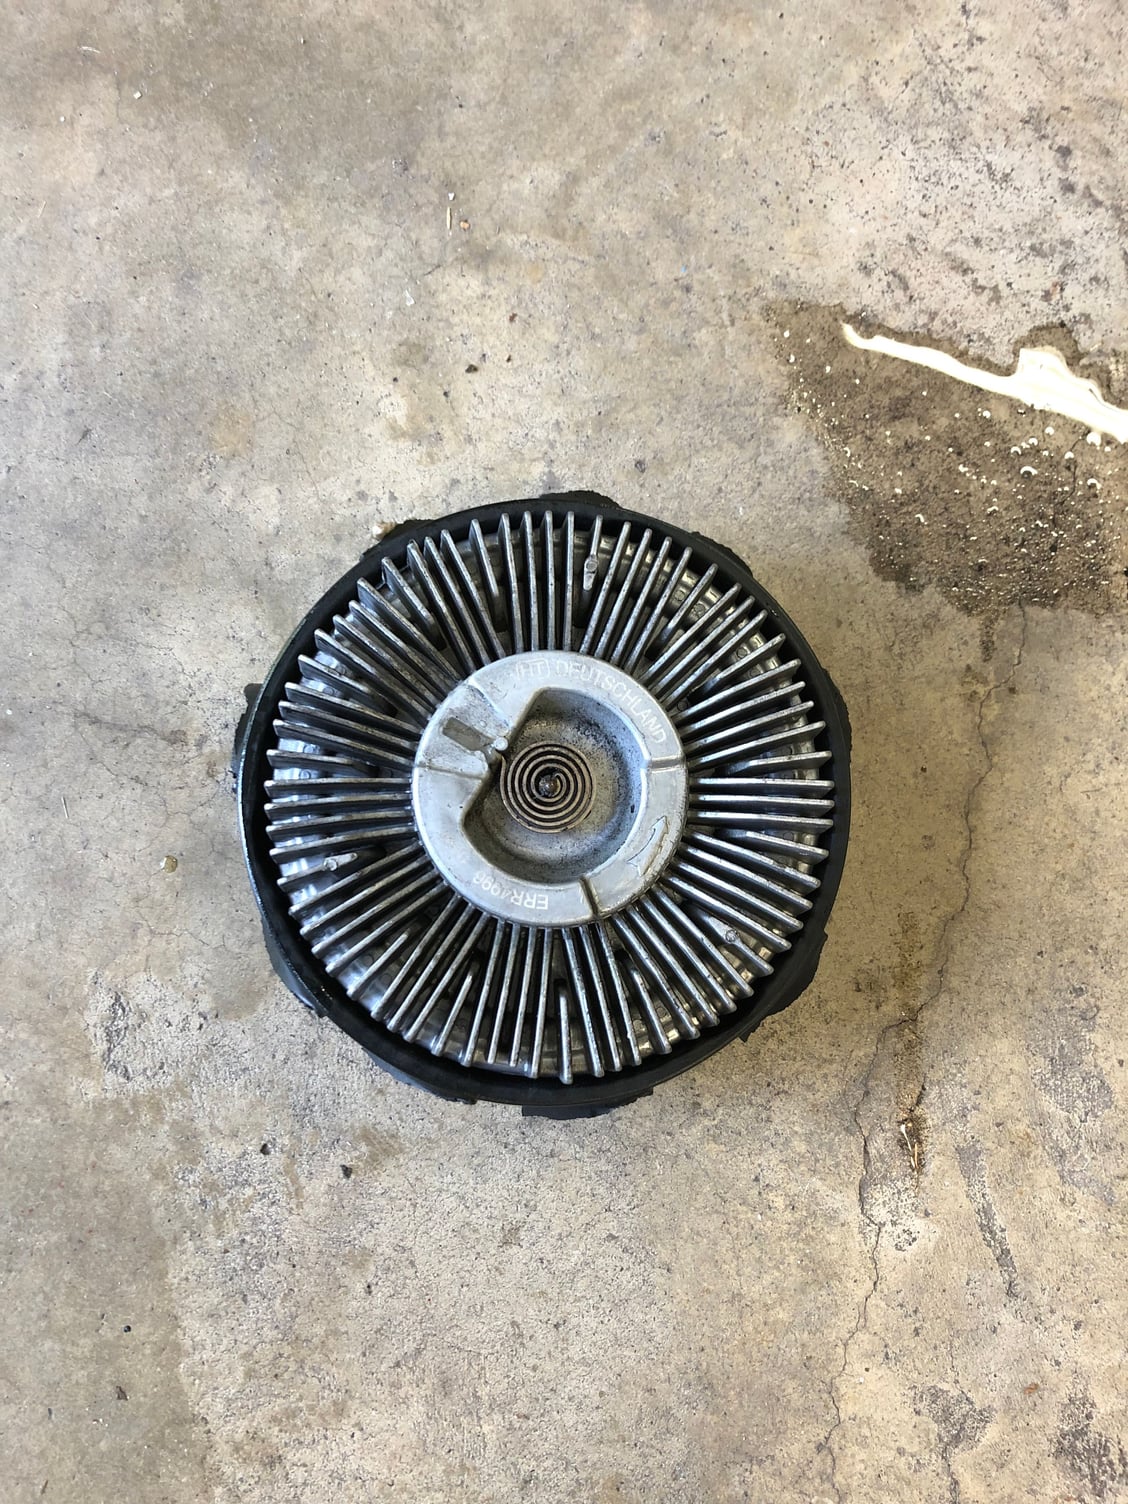 Why did my fan clutch just explode - Land Rover Forums - Land Rover Why Is My New Fan Clutch So Loud